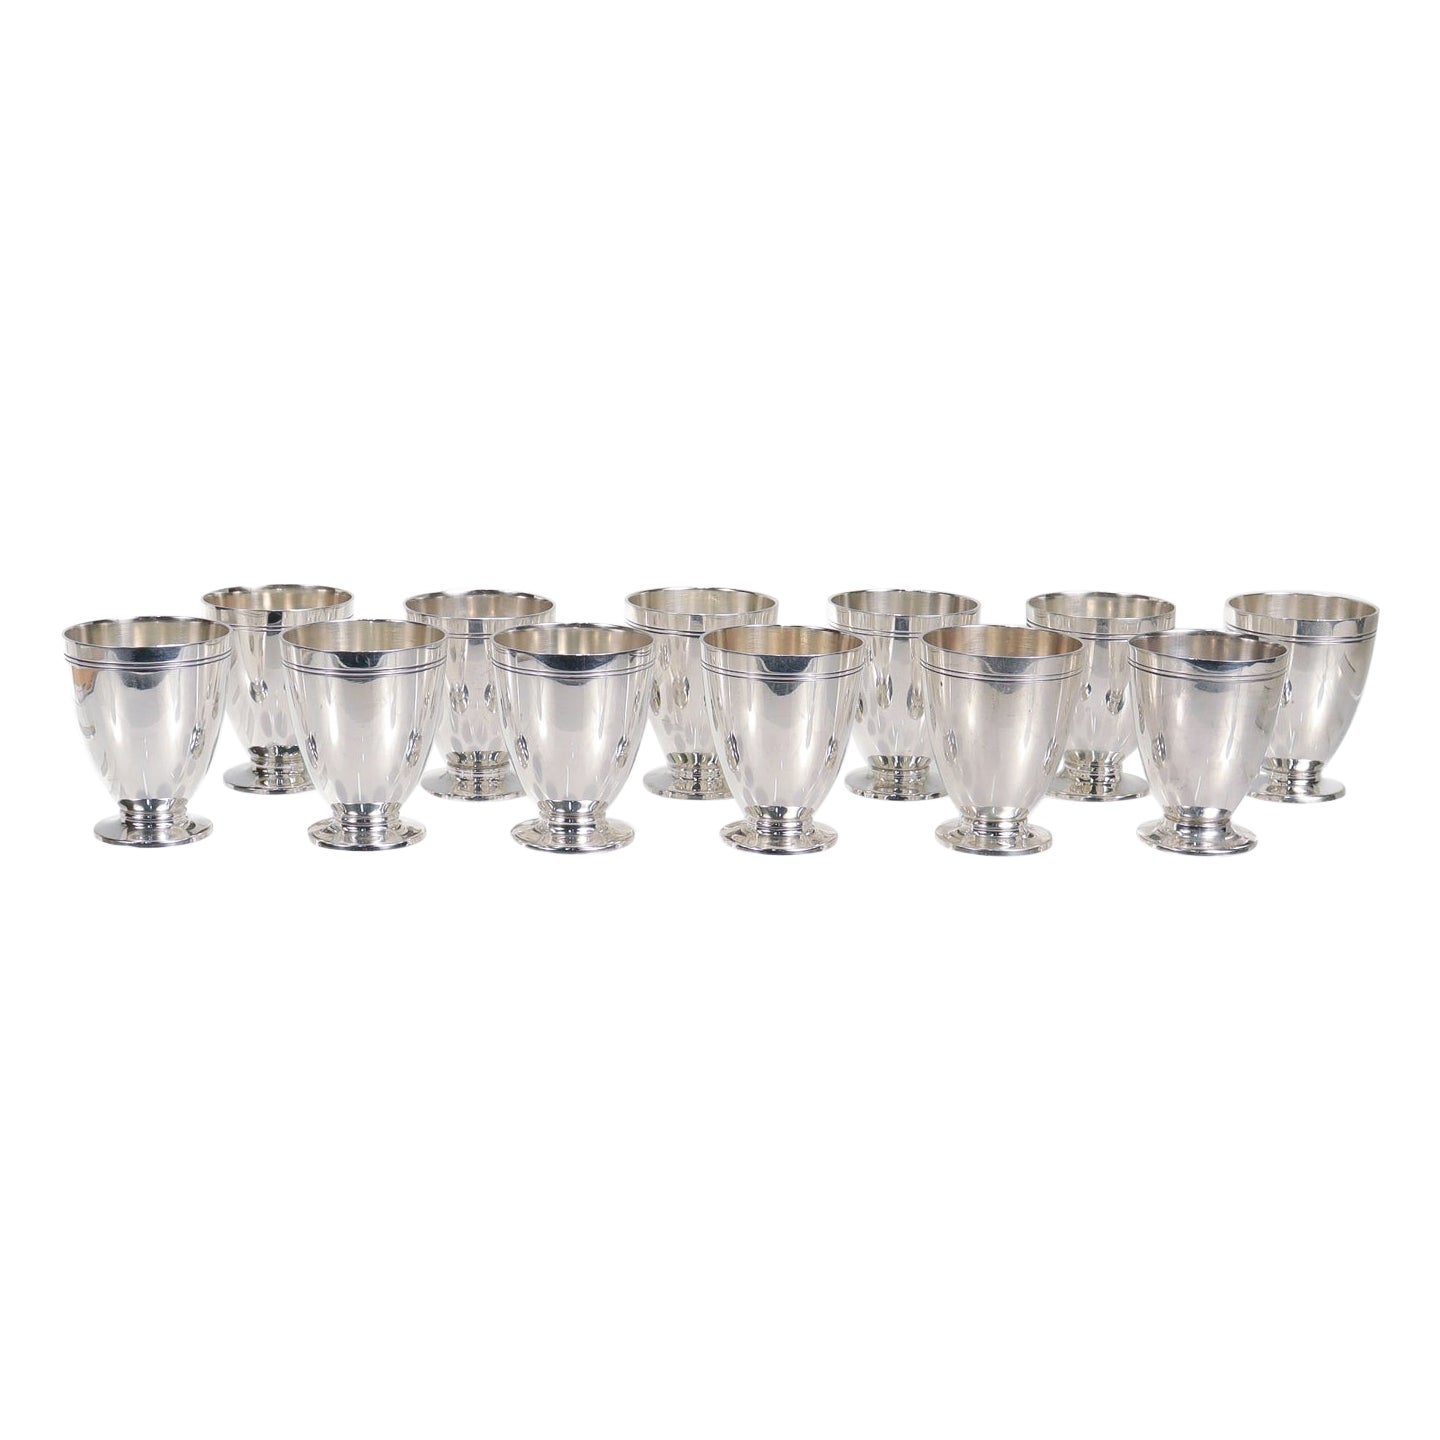 Set of 12 Tiffany & Co Art Deco Sterling Silver Art Deco Shot Cups or Cordials